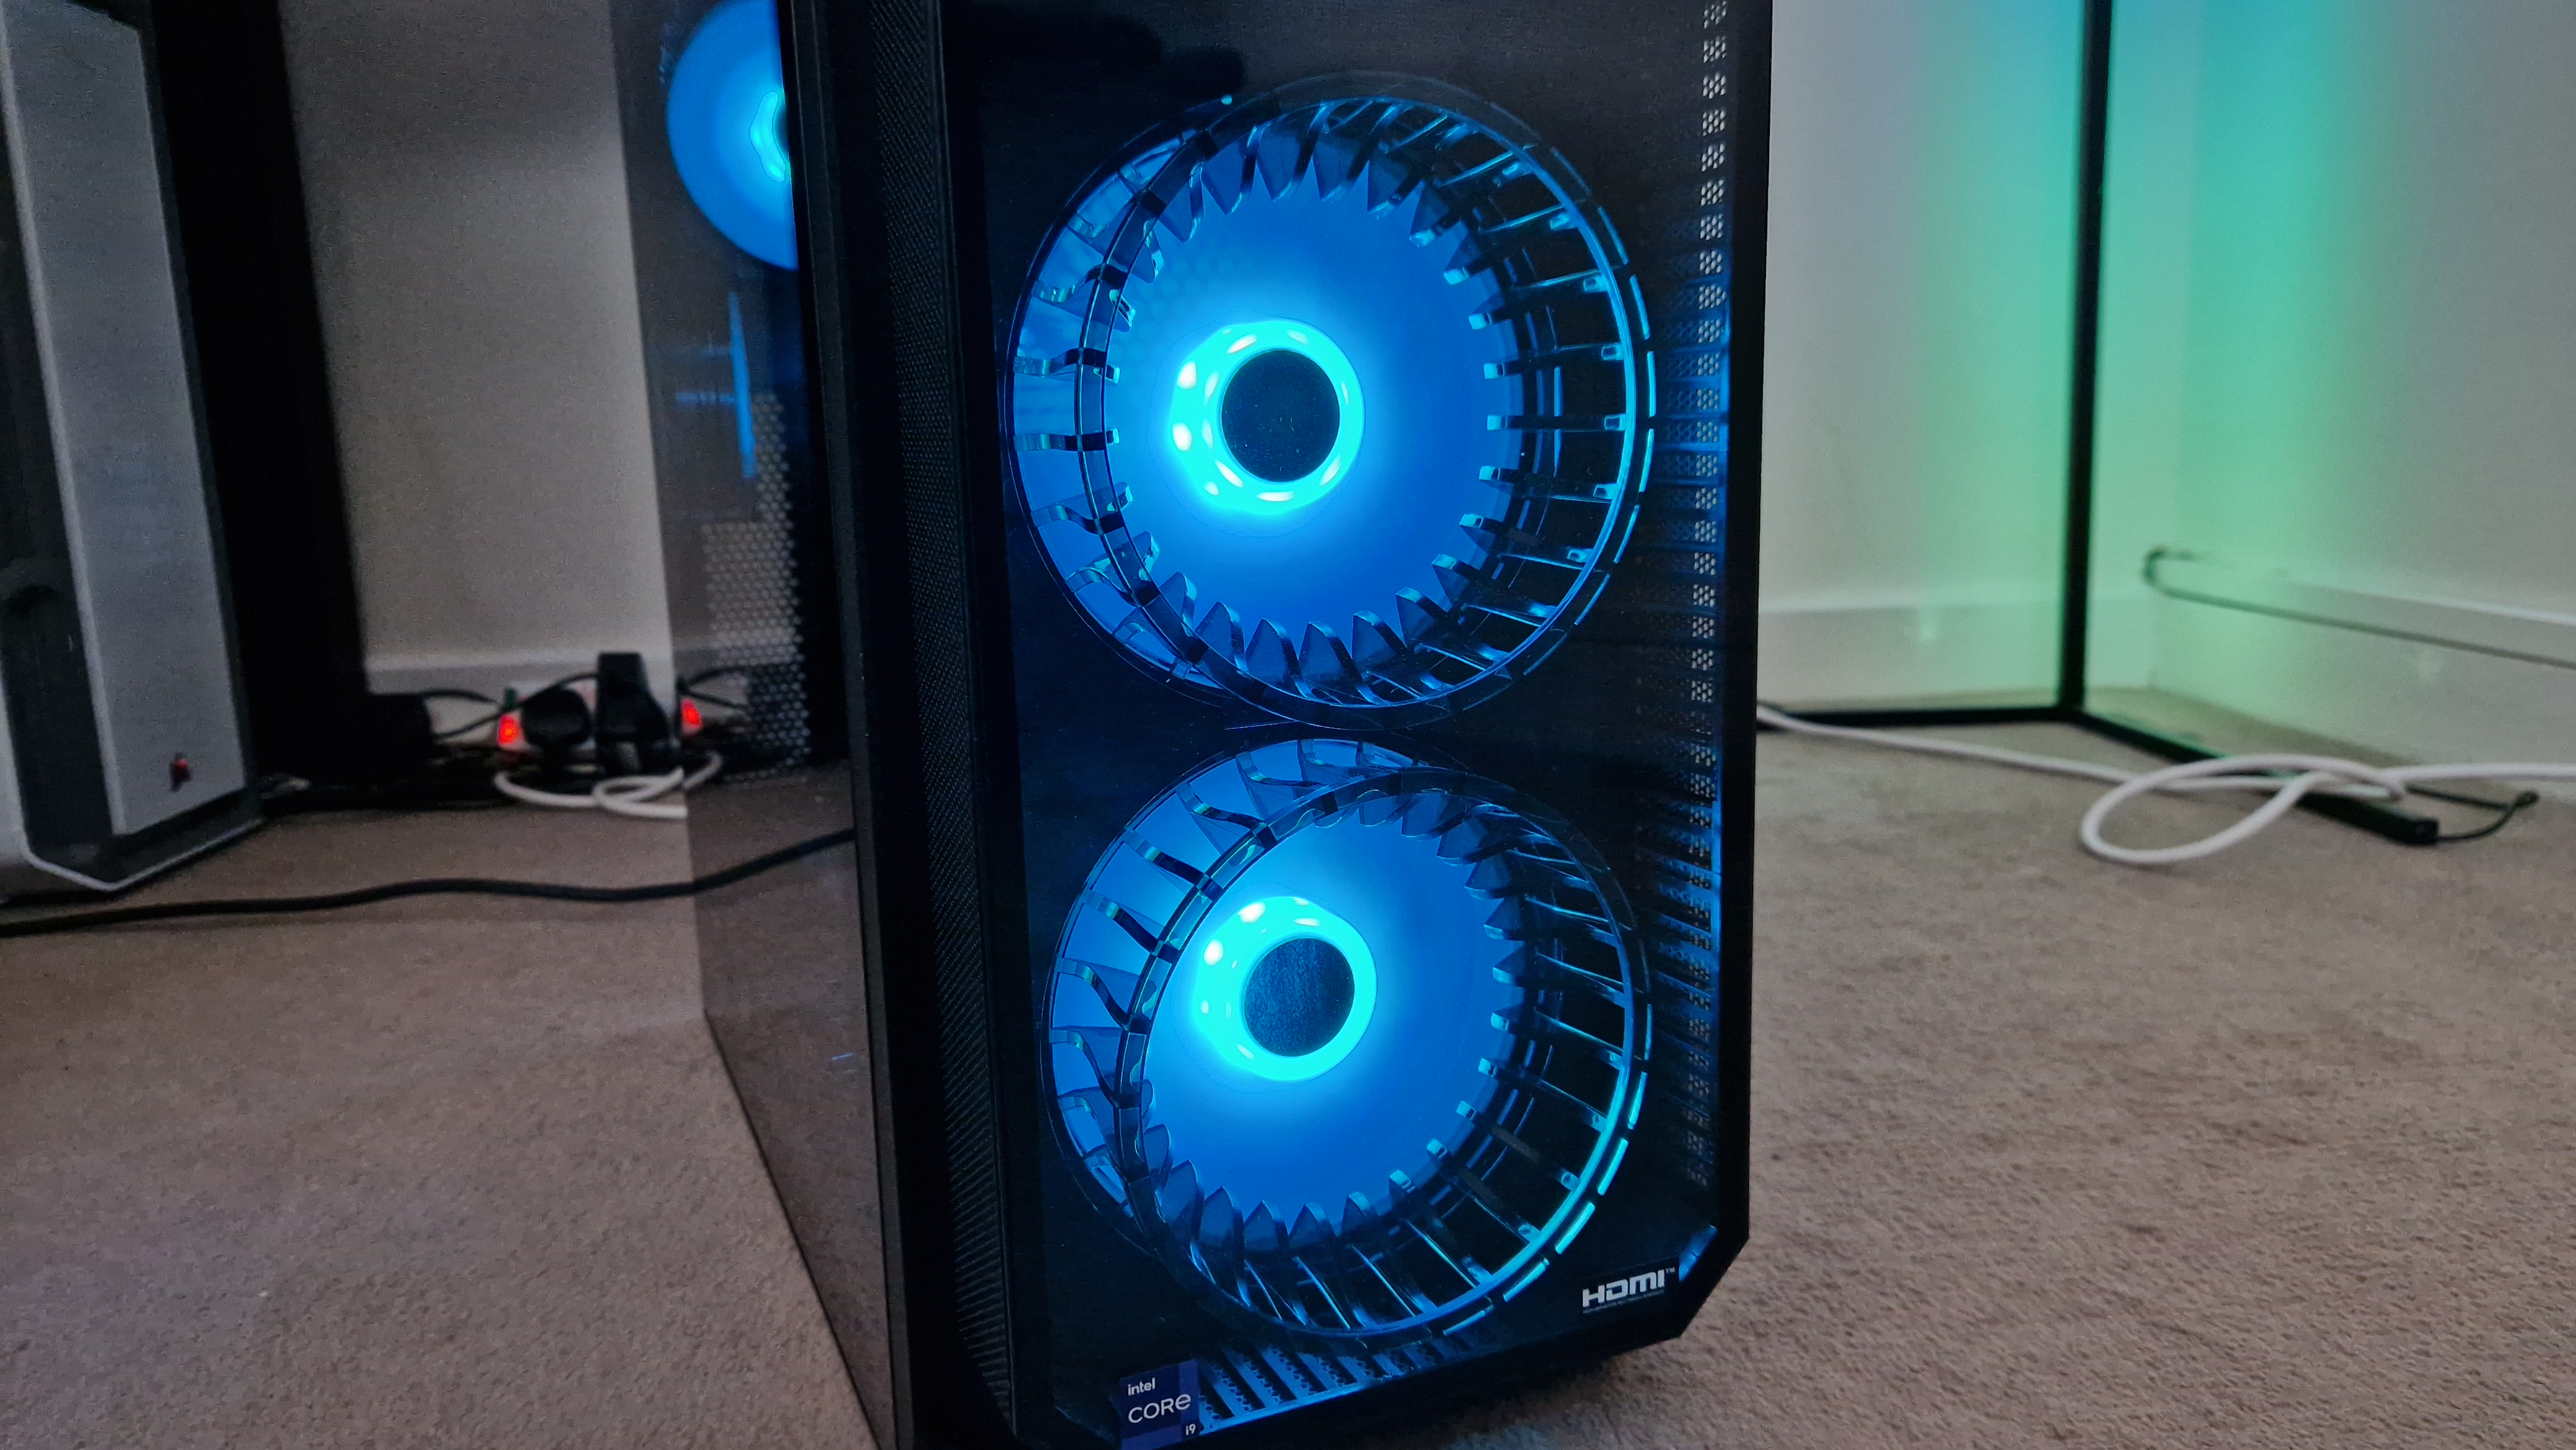 Acer Predator Orion 7000's frontal fans coloured blue with RGB lights